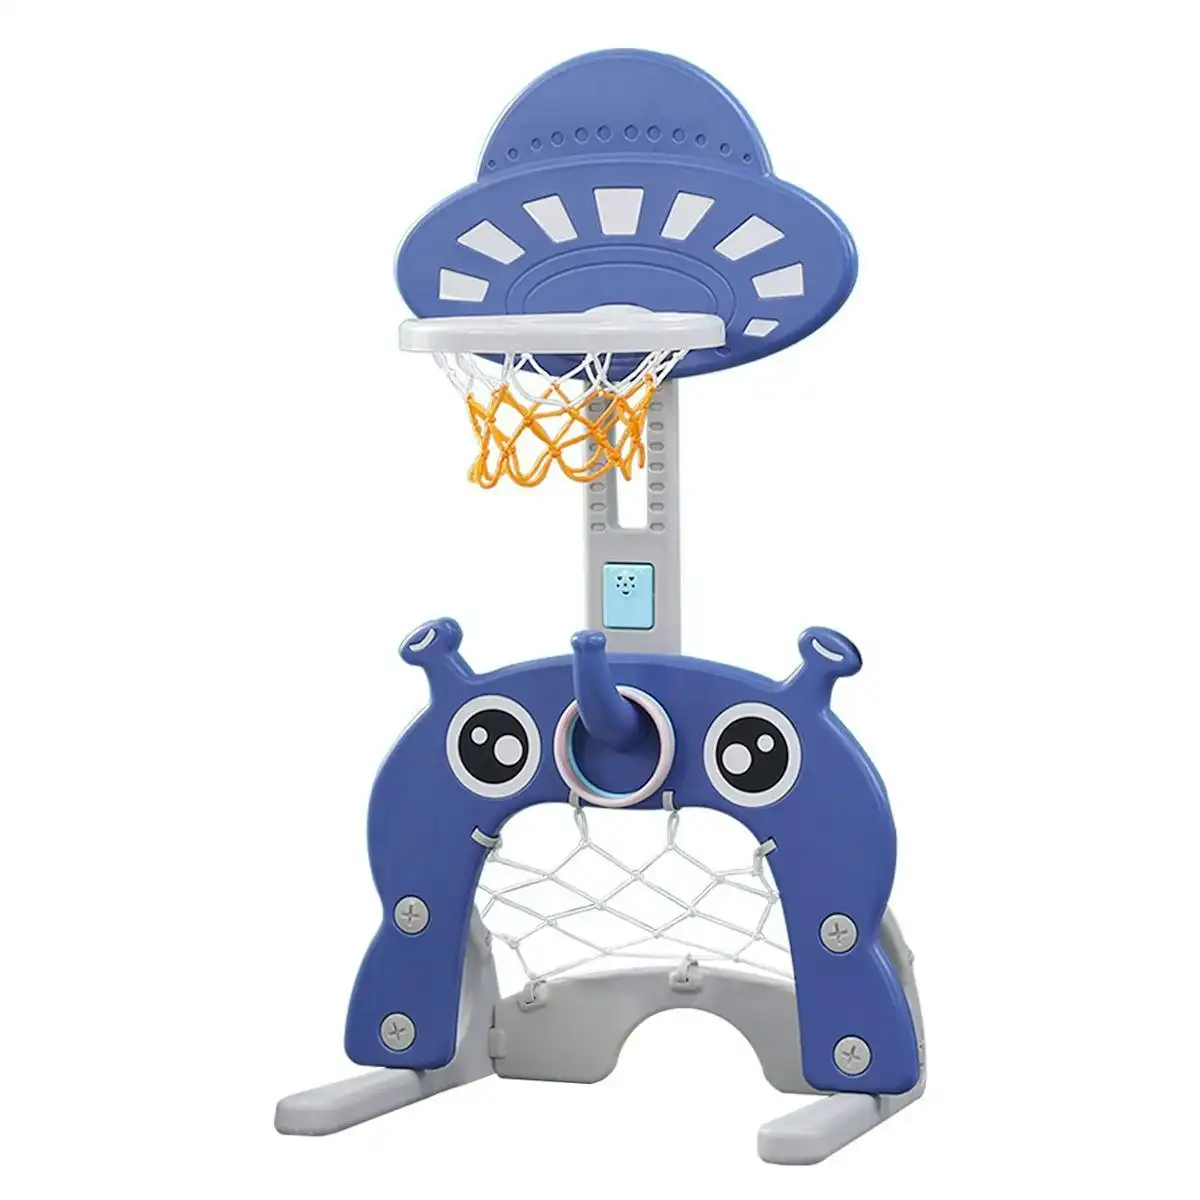 Ausway Kids Basketball Hoop Stand Set Ring Toss Golf Game Football Gate Activity Centre Indoor Outdoor Adjustable 5-in-1